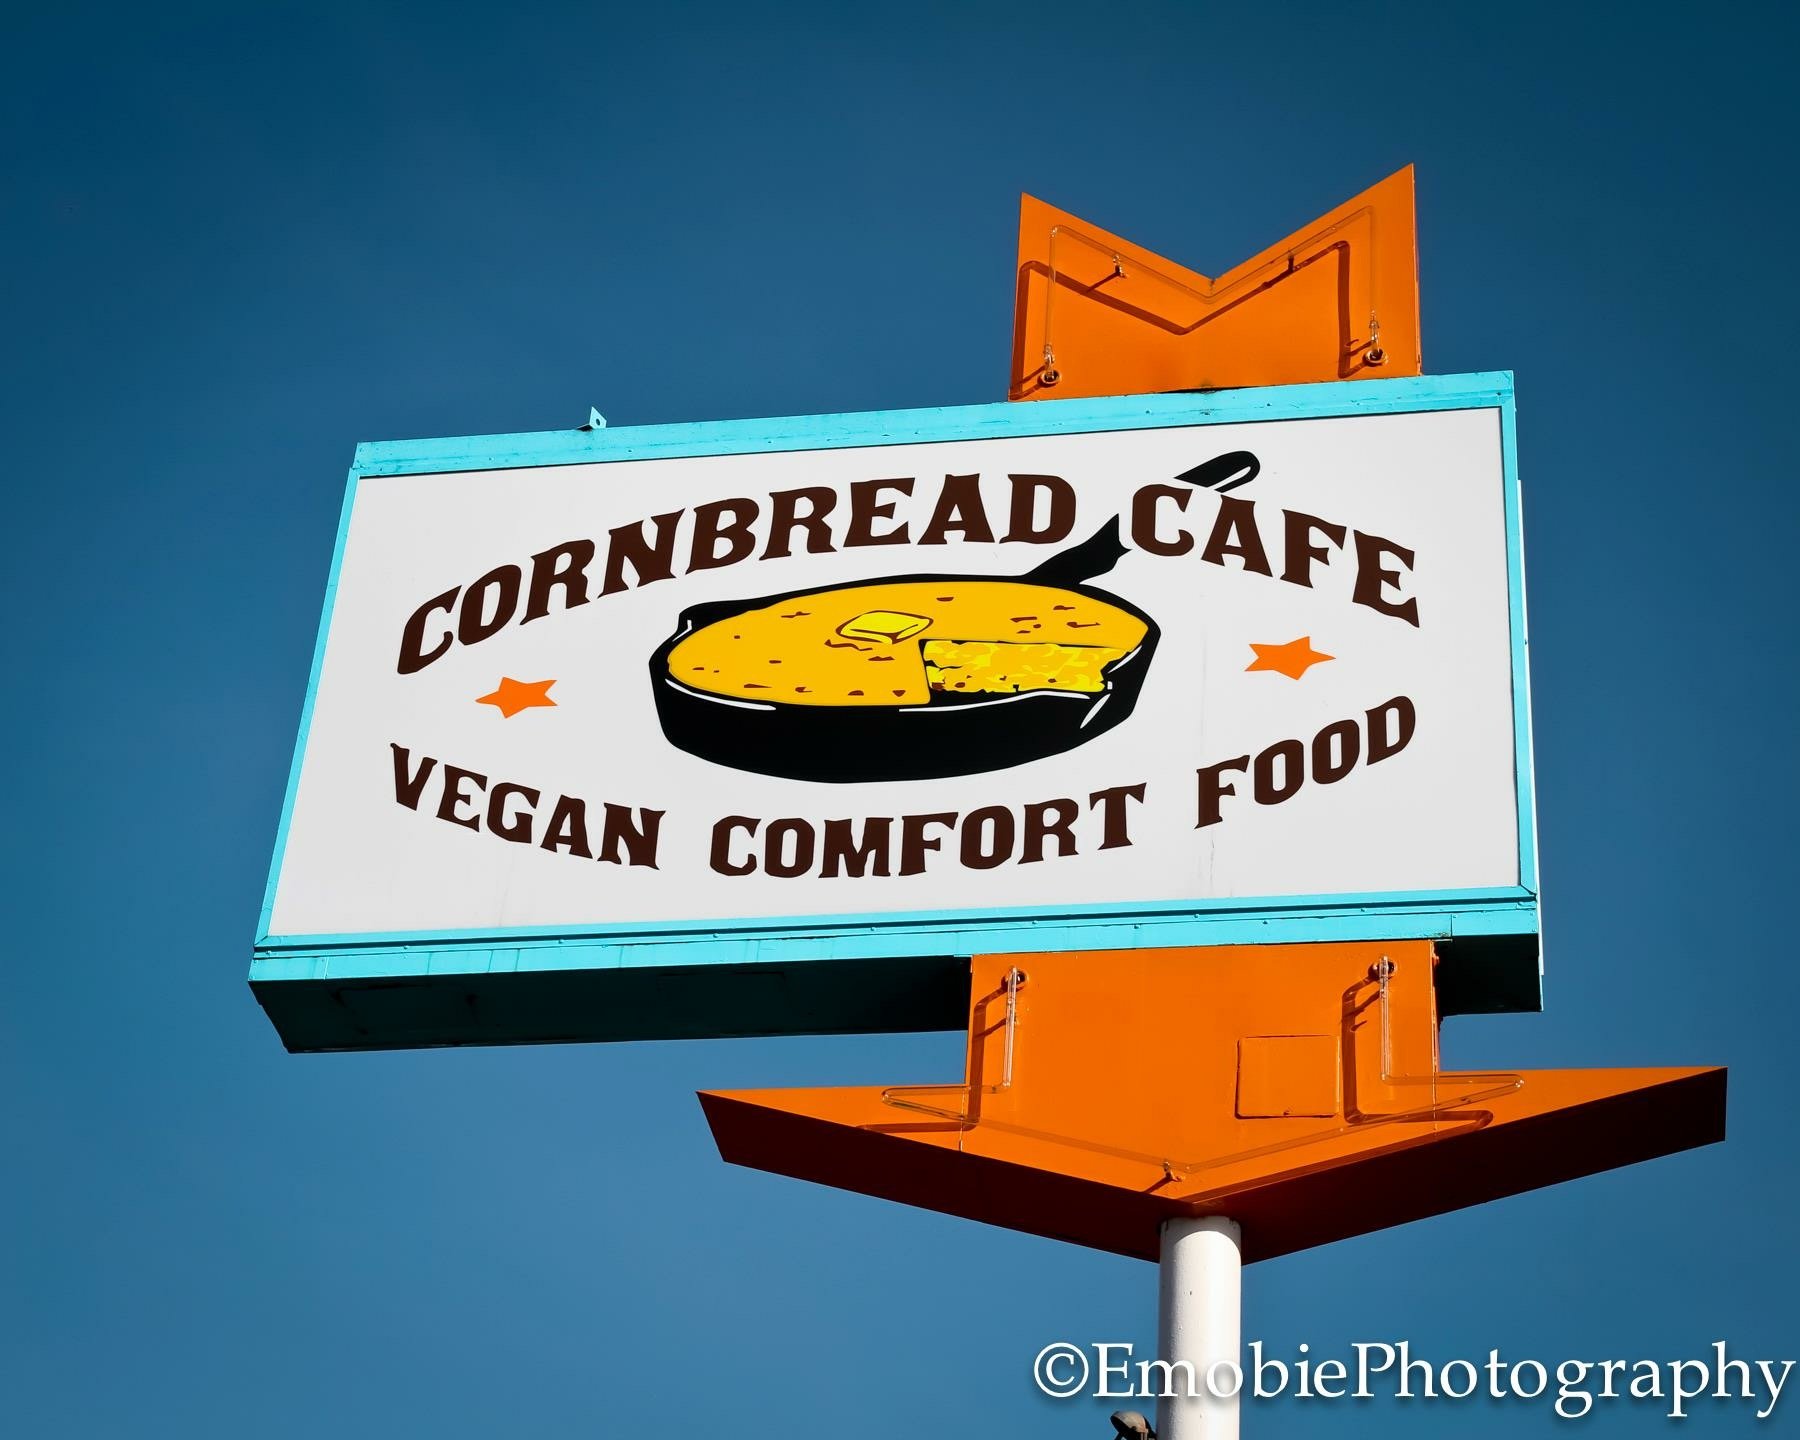 100% vegan comfort food with a strong focus on organic food and equal rights. Breakfast, lunch & dinner served daily. Free wifi, parking, and smiles.